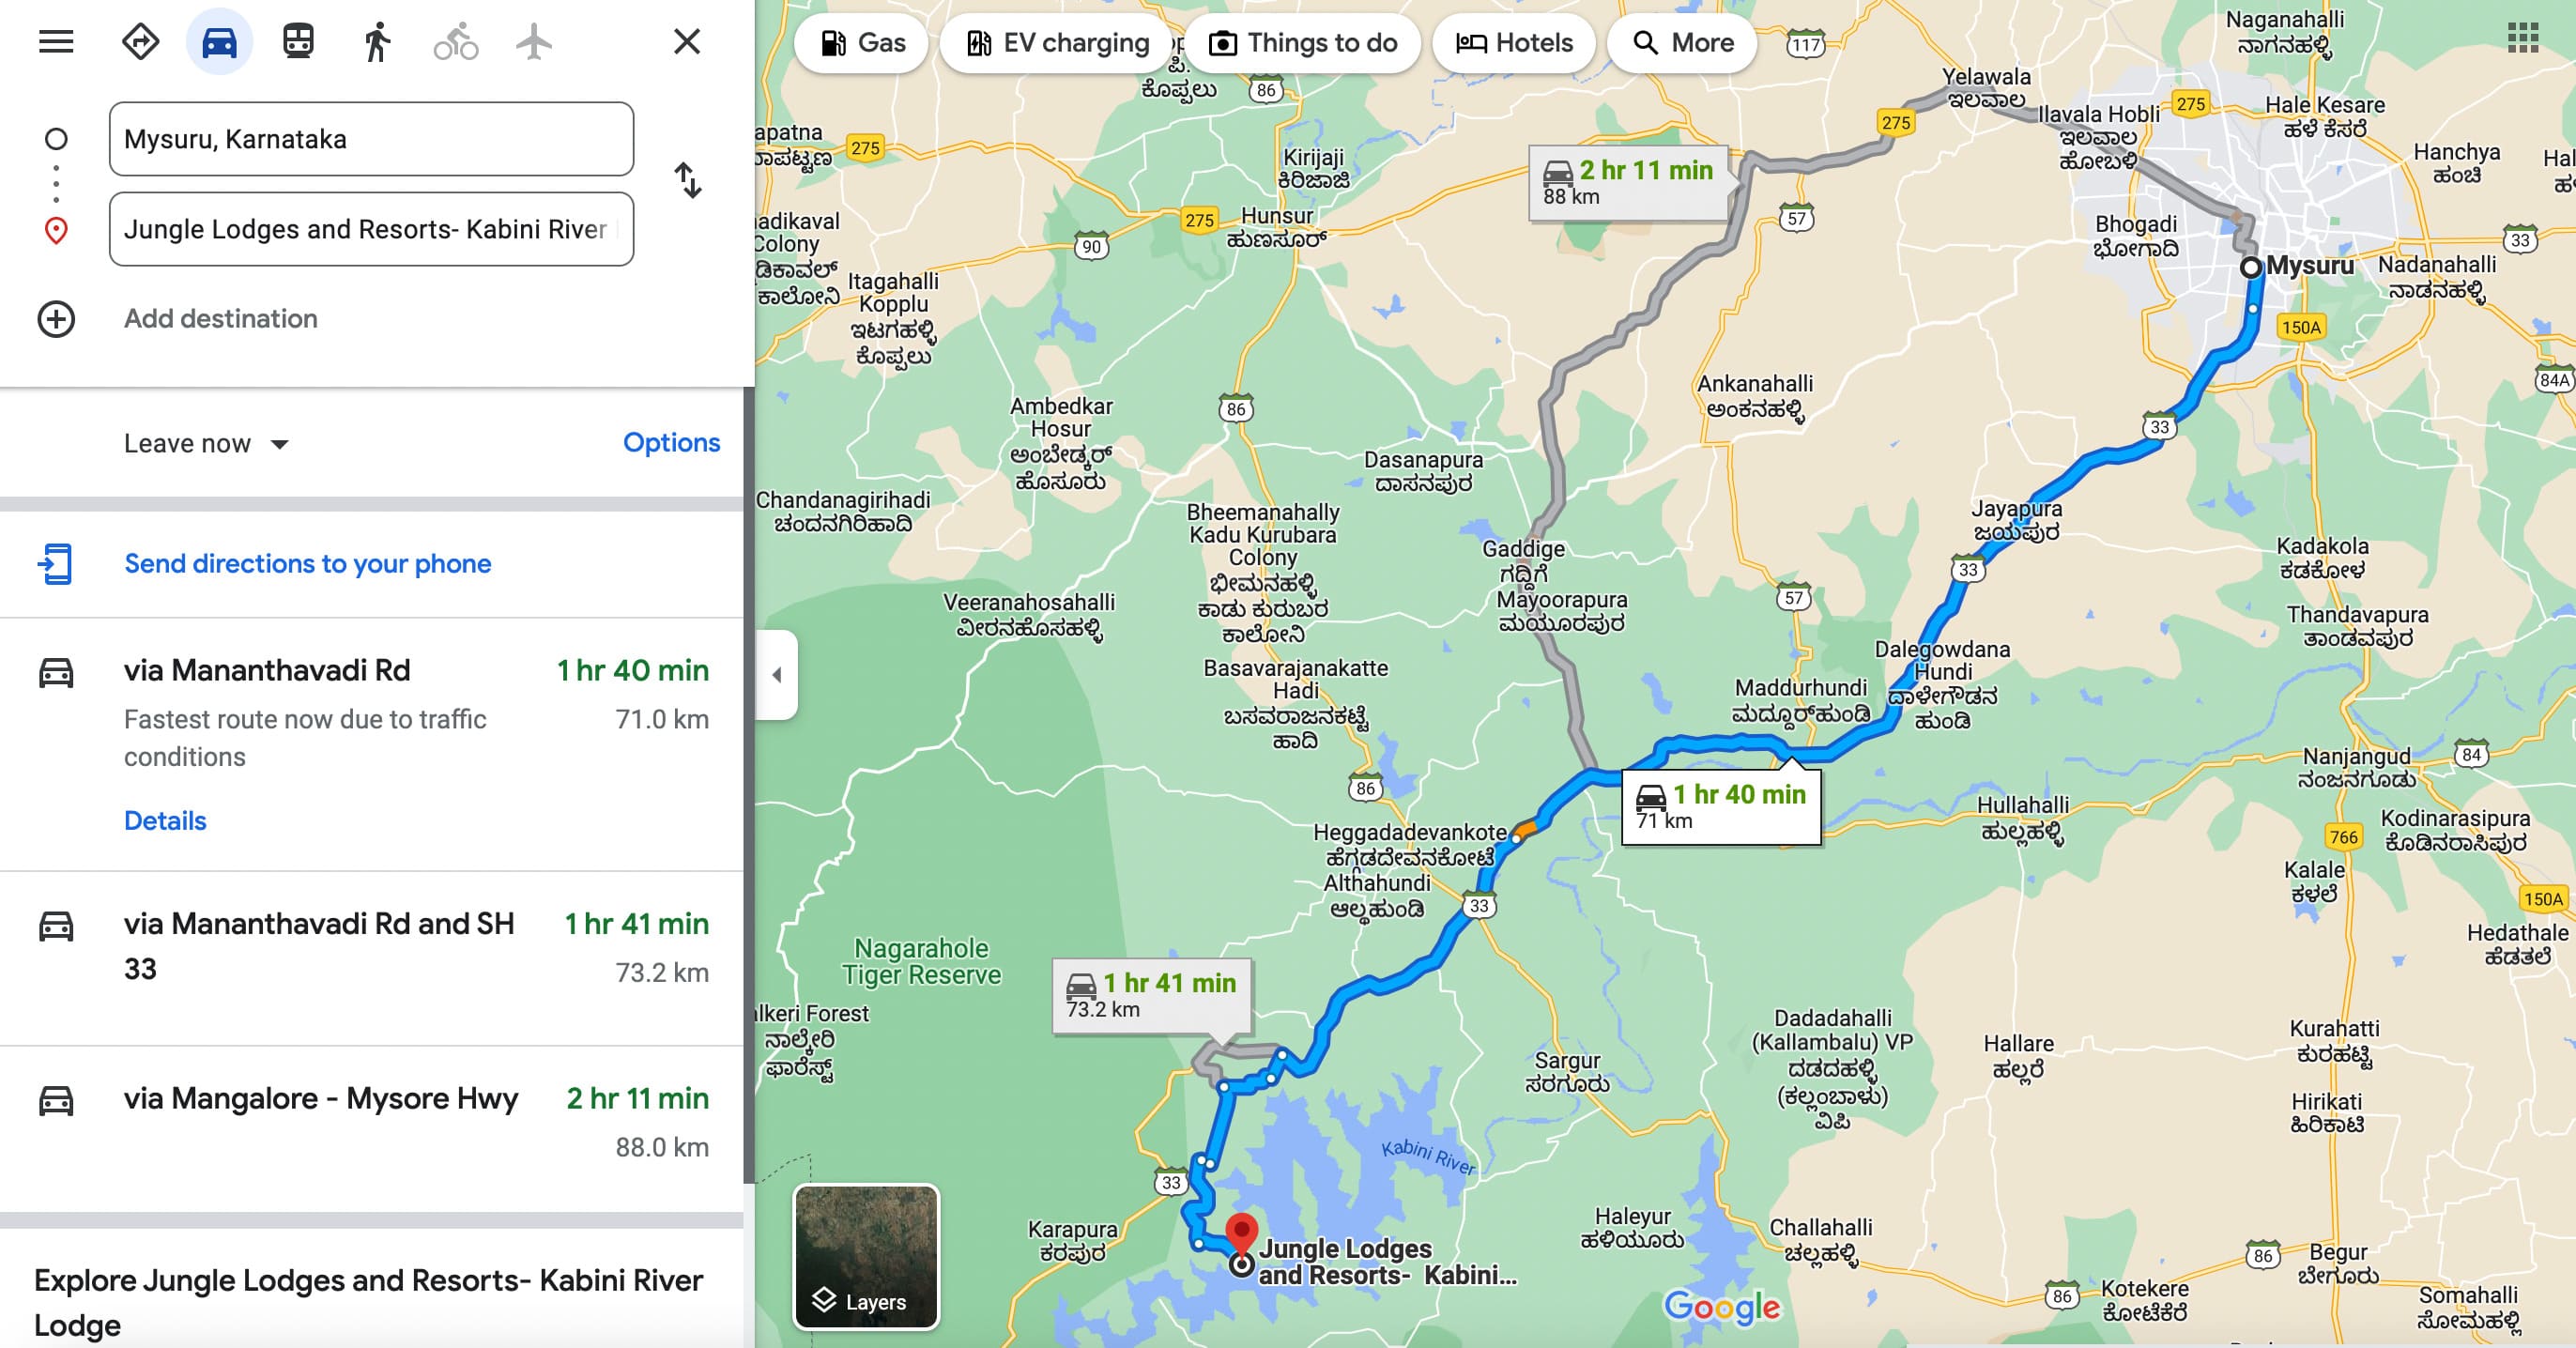 Directions to Kabini River Lodge, Jungle Lodges and Resorts